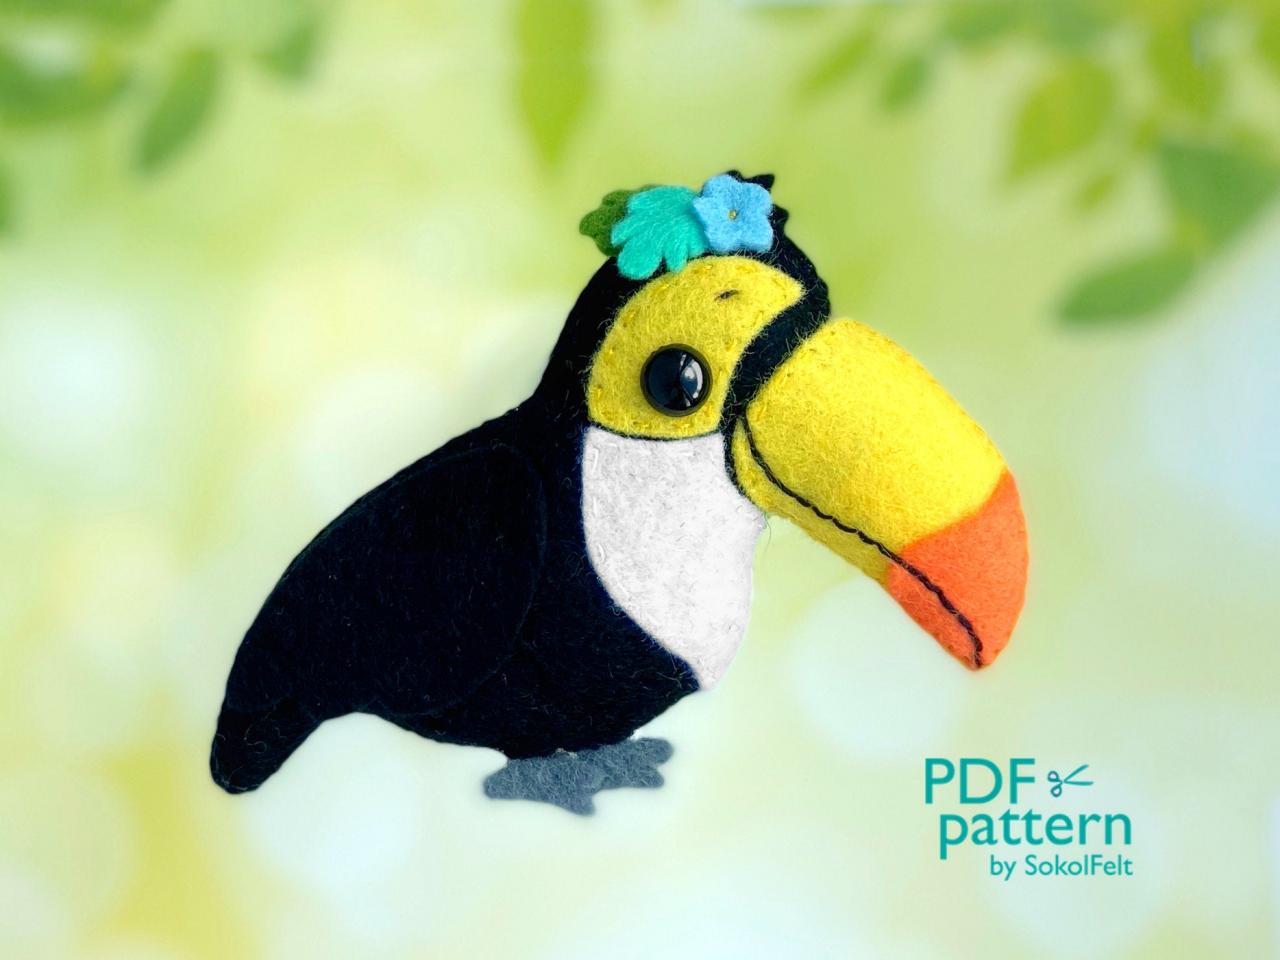 Cute Toucan Felt Toy Pdf And Svg Pattern, Plush Bird Toy Sewing Tutorial, Baby Crib Mobile Toy